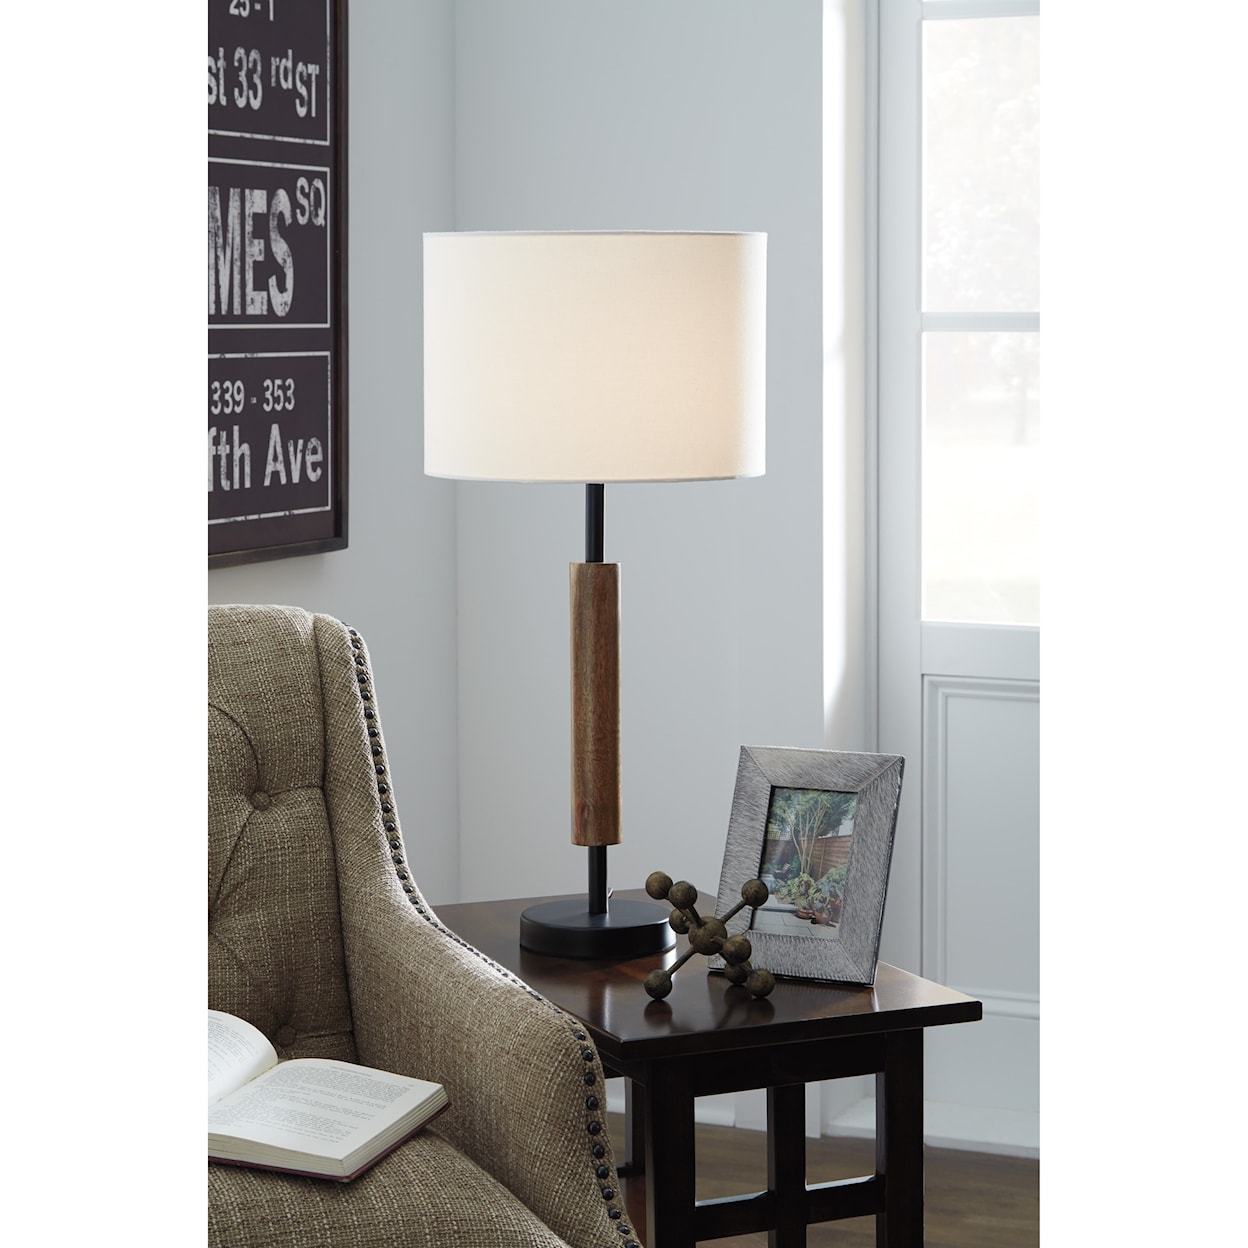 Signature Design by Ashley Lamps - Contemporary Set of 2 Maliny Black/Brown Wood Table Lamps